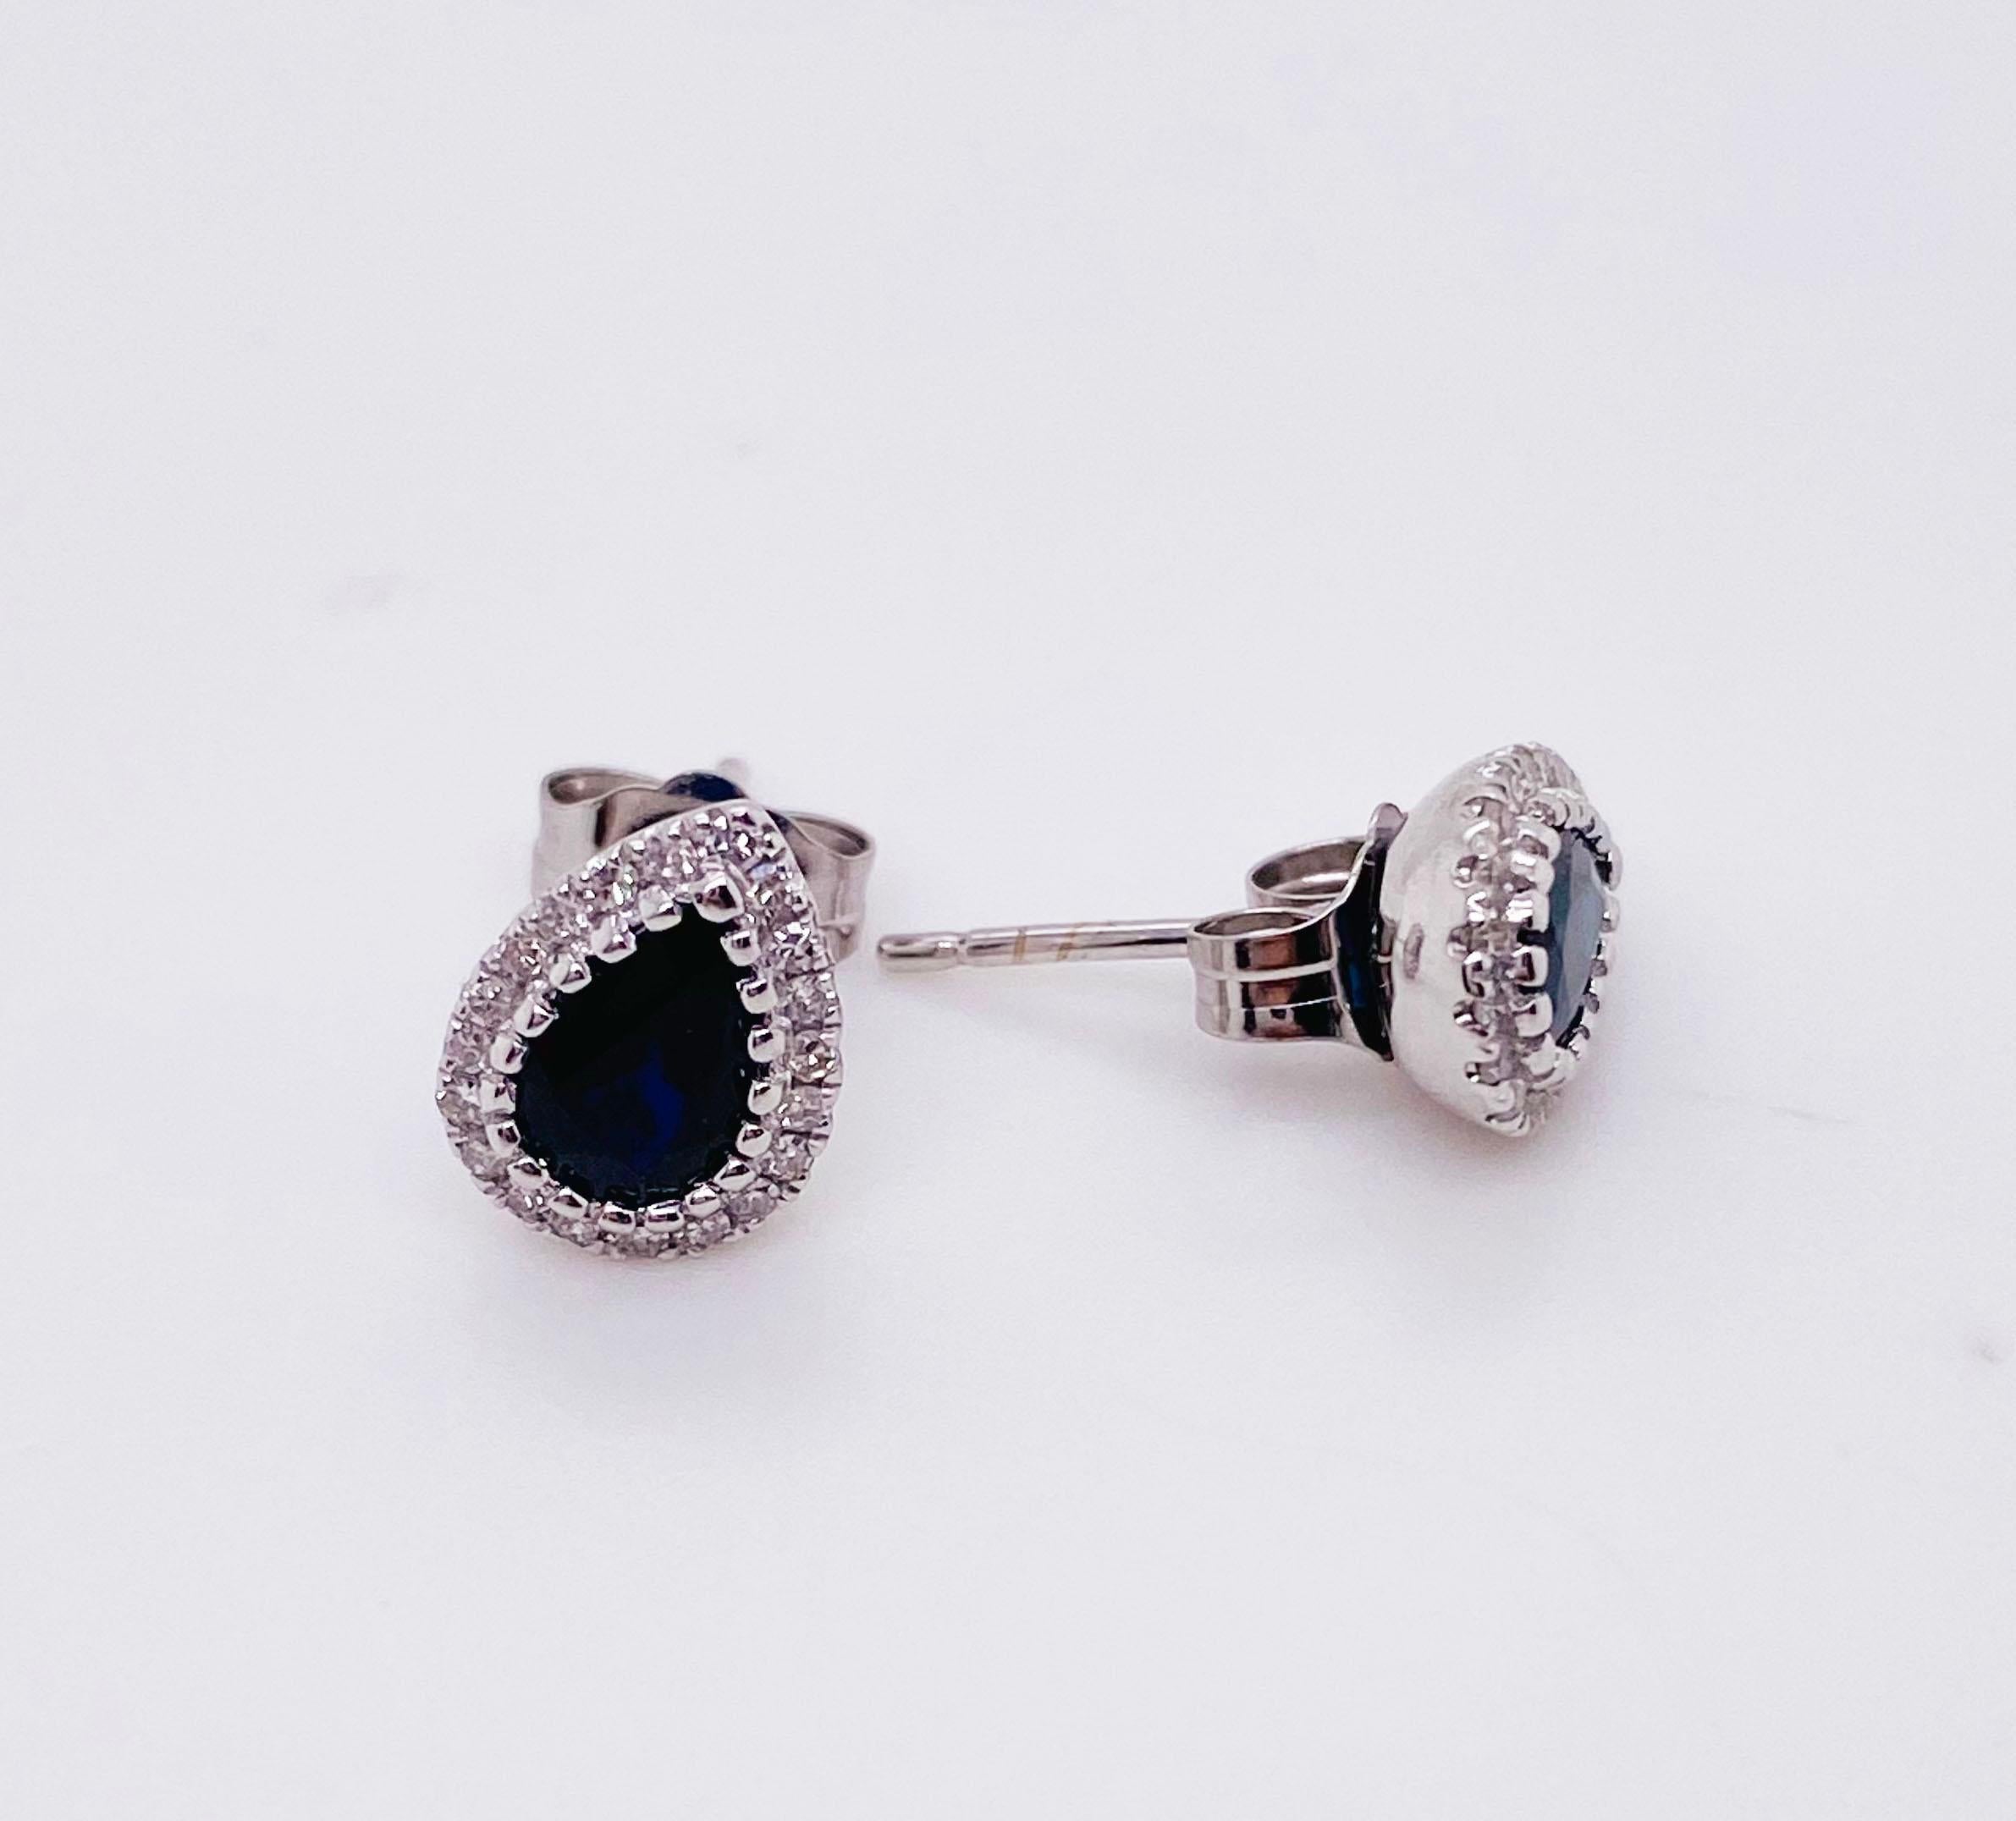 These lovely blue sapphire earrings are a stud style that goes great on any earlobe! The earrings and posts are all 14 karat white gold and this enhances the twenty diamonds that go around each sapphire. The diamonds are all full cut with 58 facets